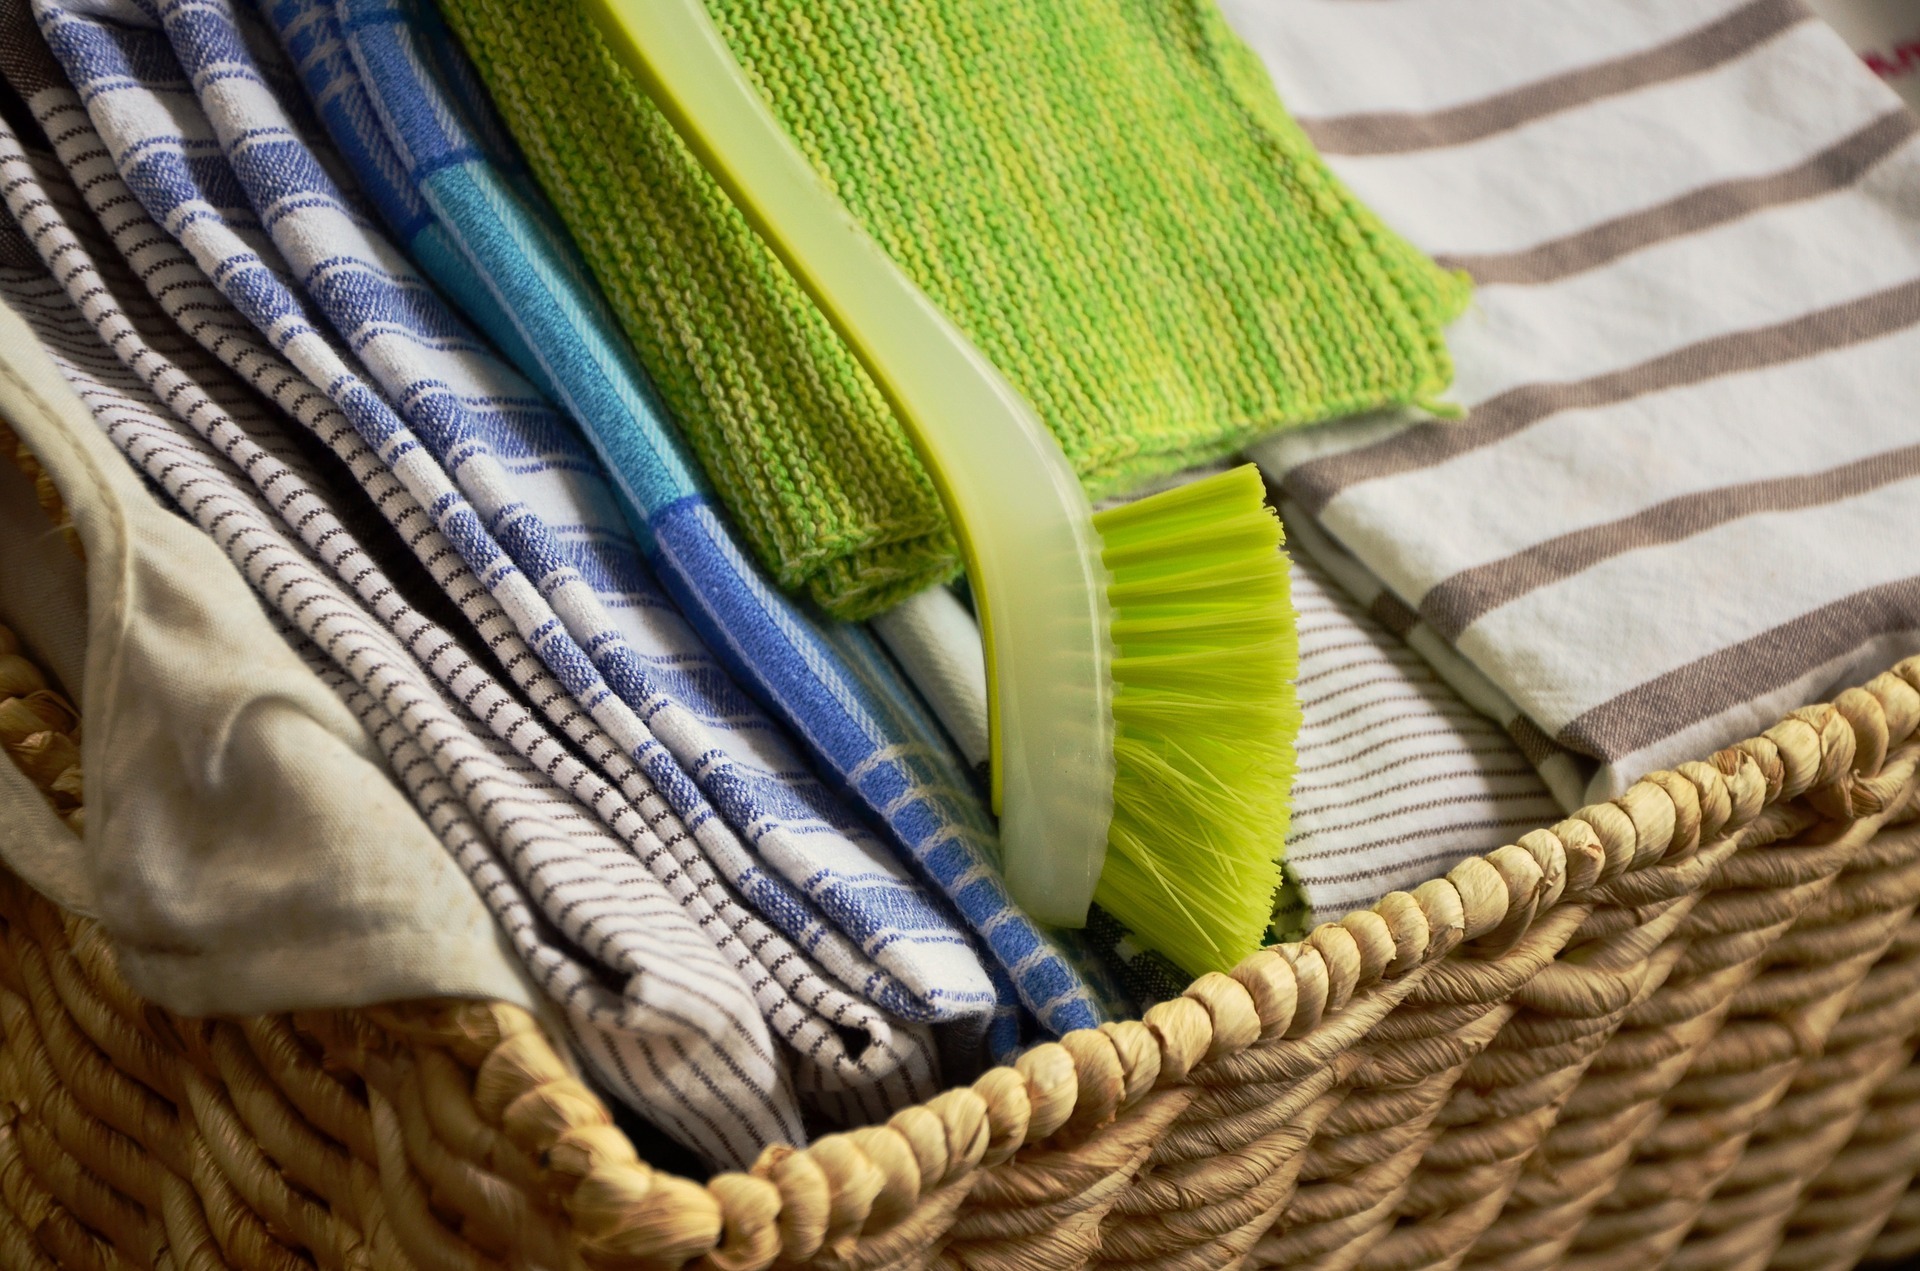 inside the basket are sets of kitchen towel and a green brush